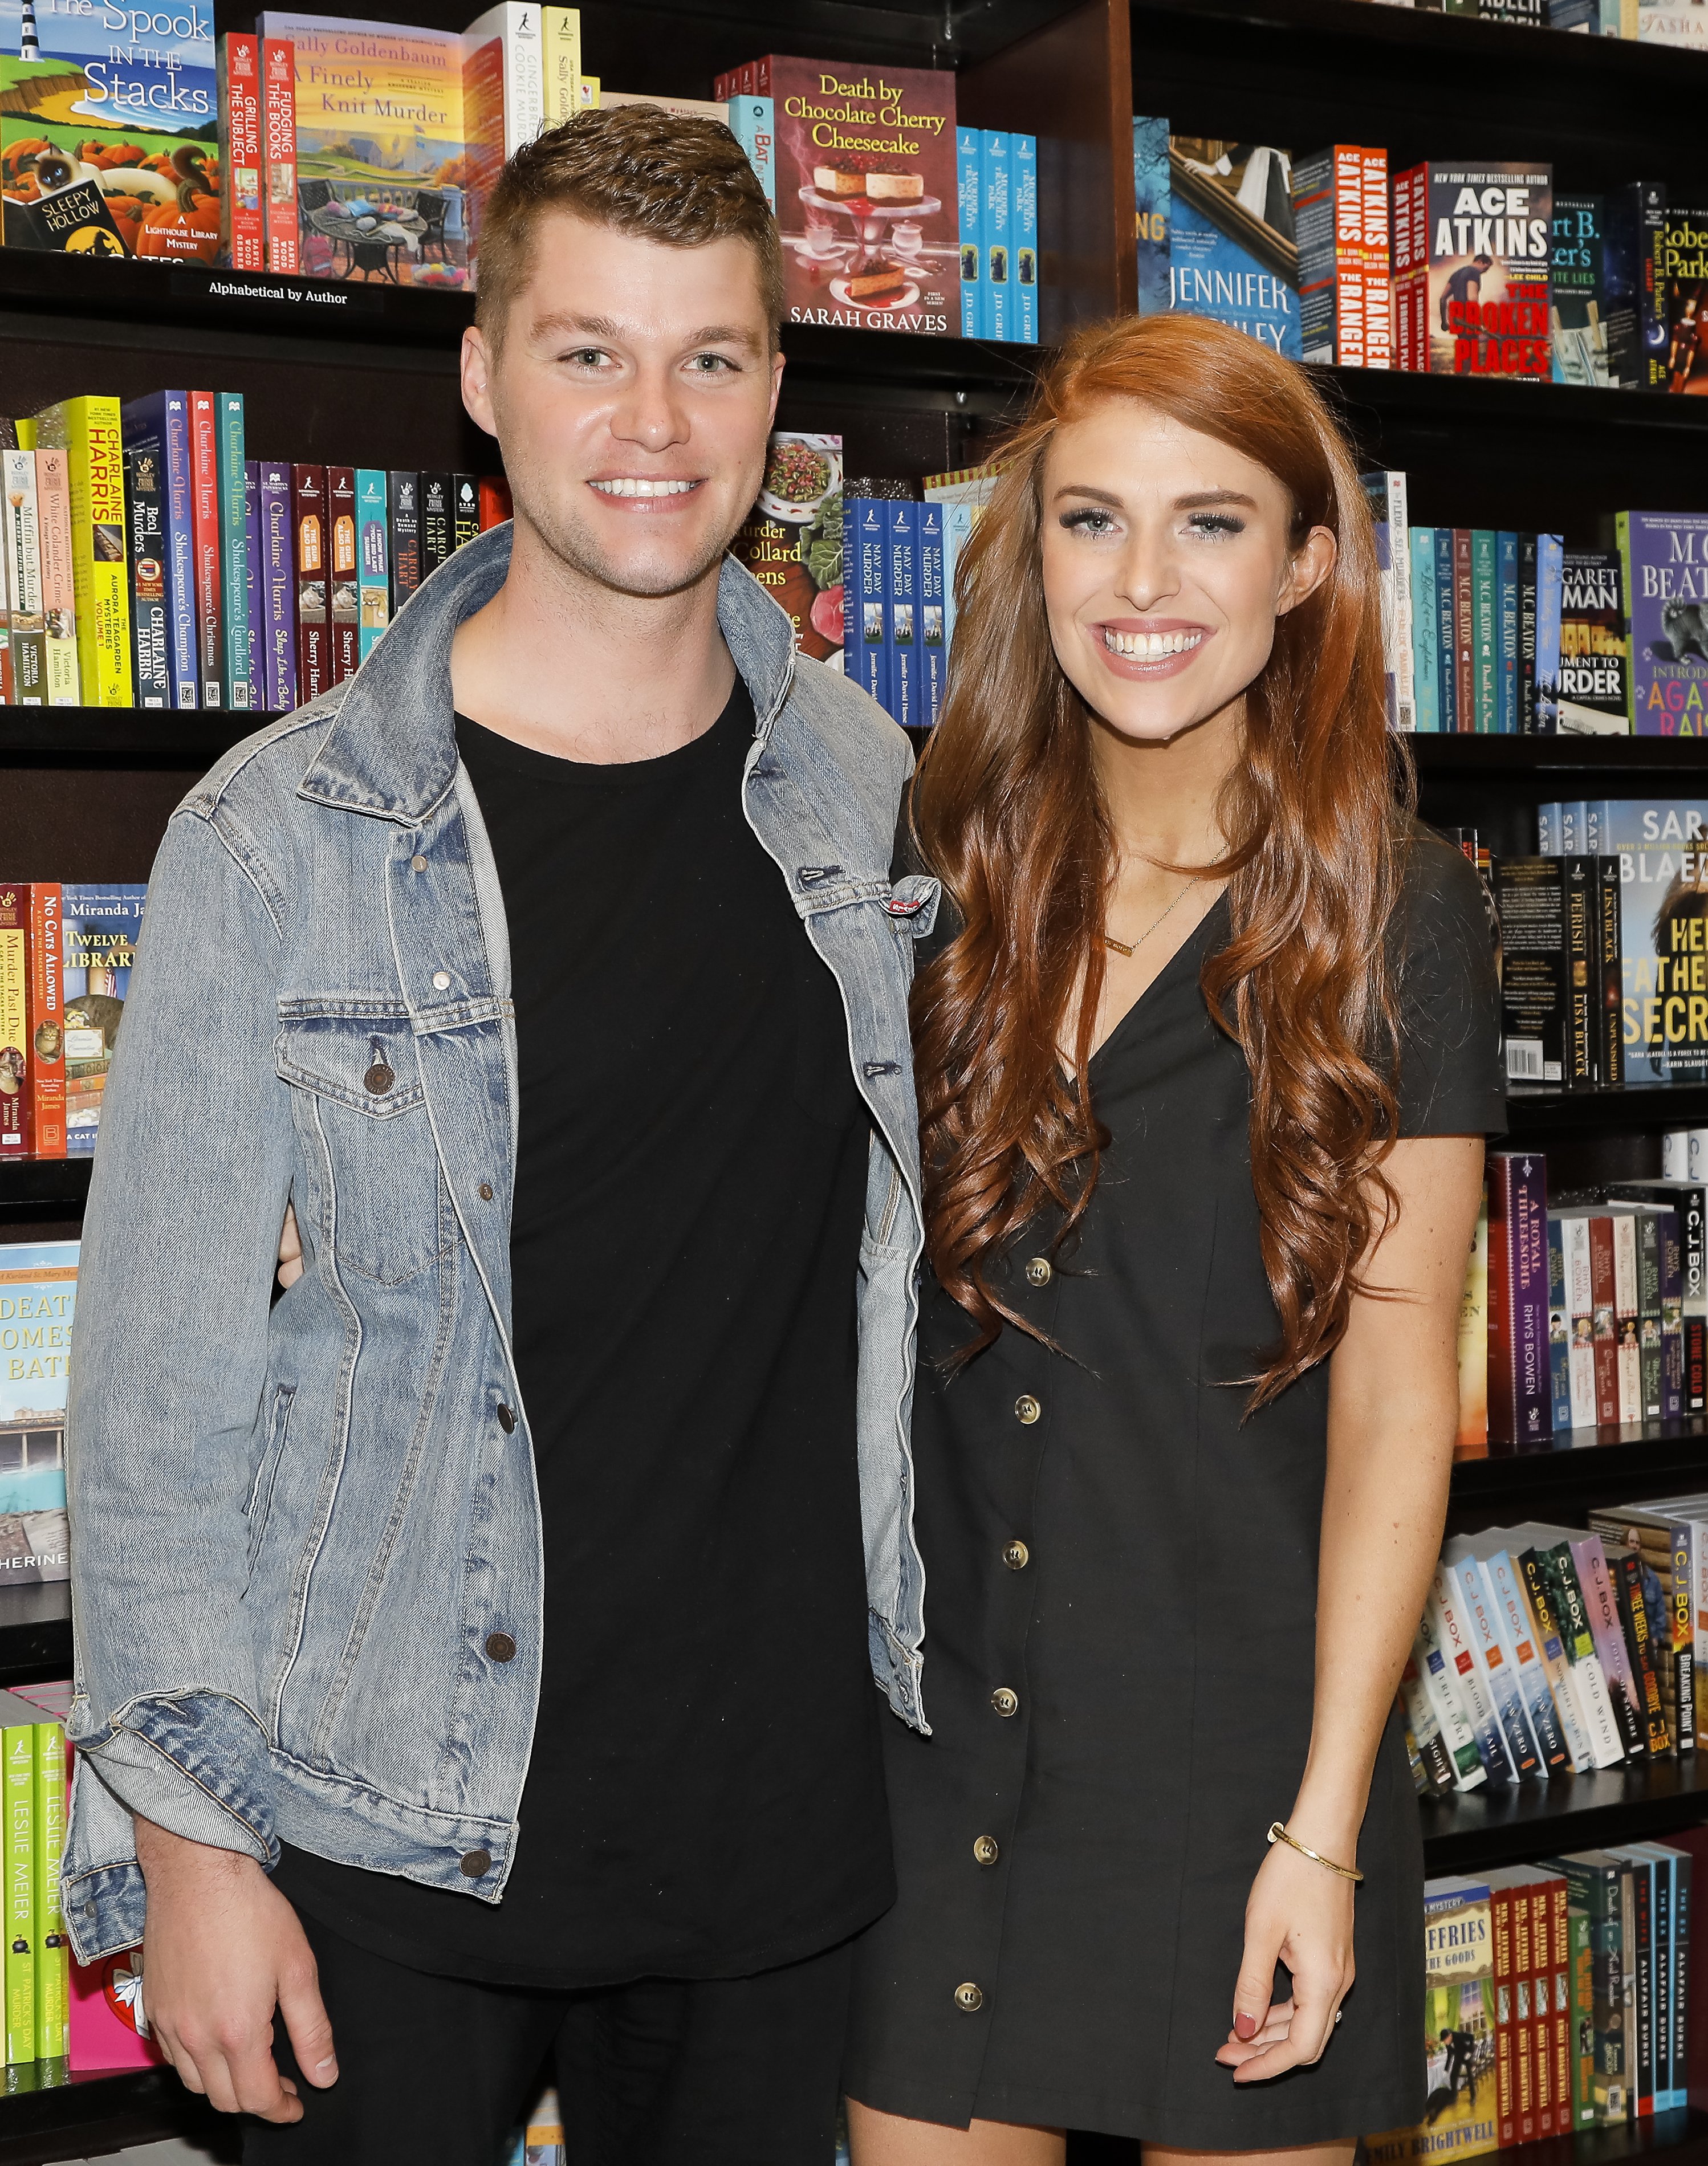 "Little People, Big World" stars Audrey Roloff is also a book author where she published "A Love Letter Life: Pursue Creatively, Date Intentionally, and Love Faithfully" in 2019. | Photo: Getty Images